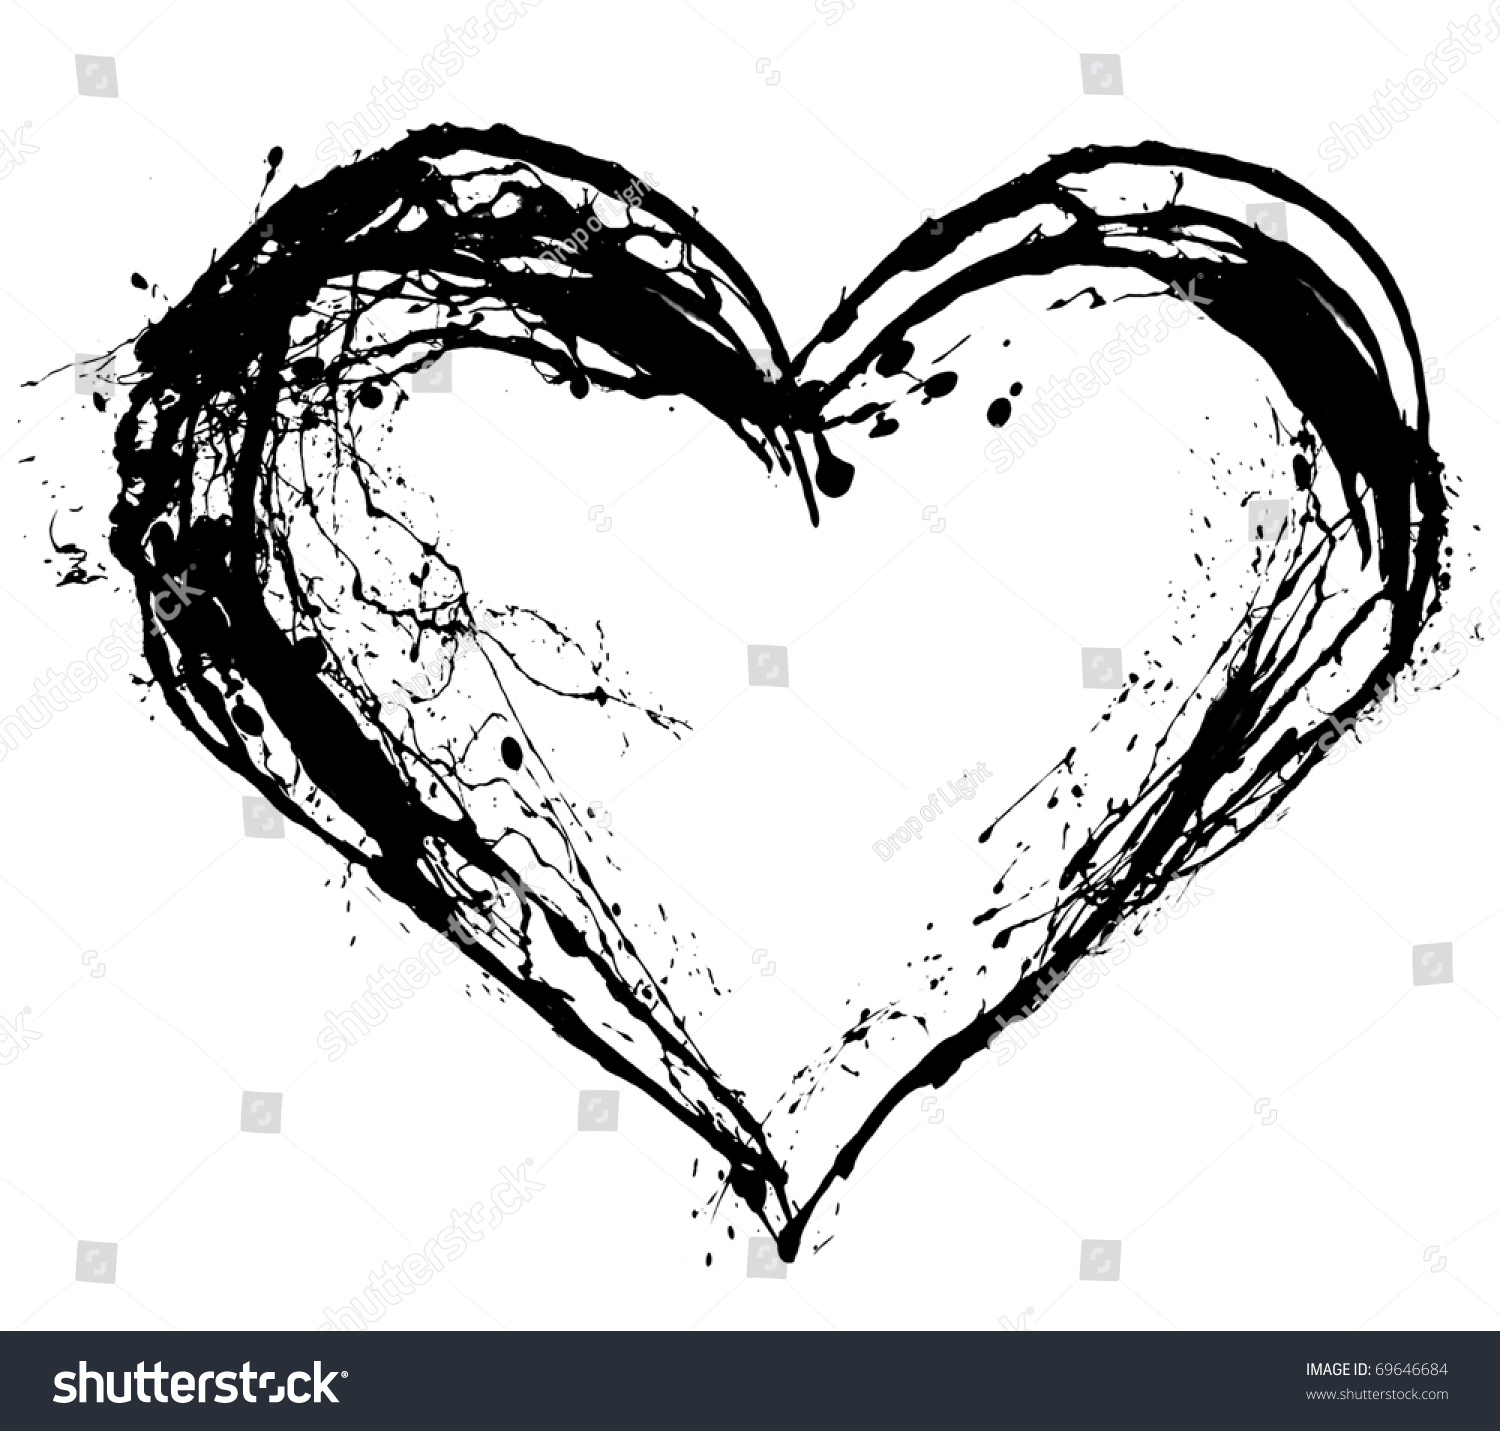 Gallery For Gt Valentine Heart Image Black And White